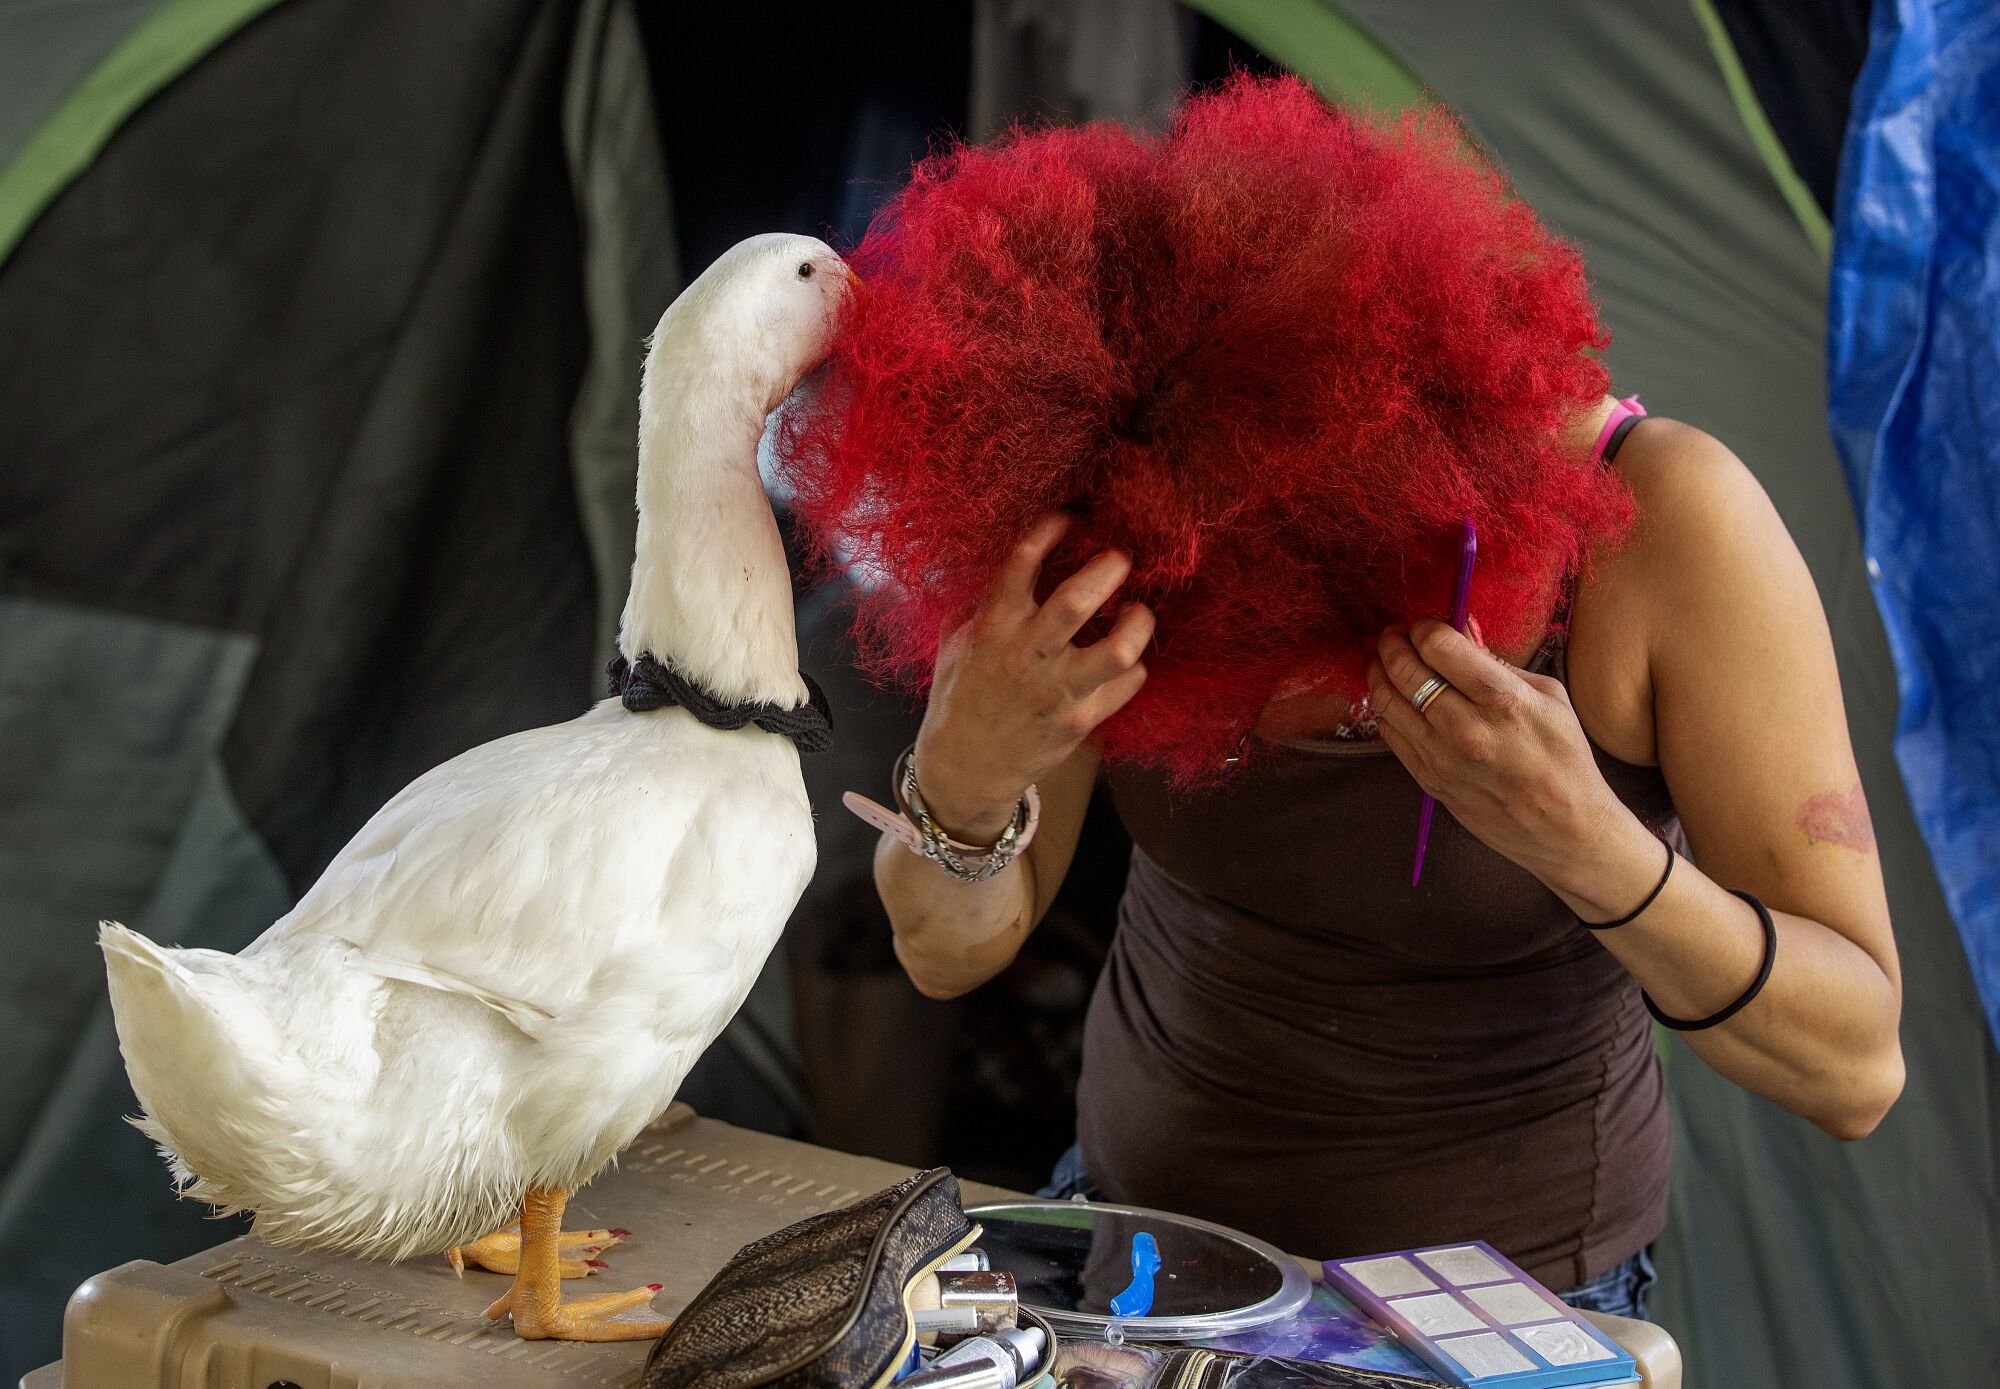 McWilliams combs her hair as her emotional support animal, a male, Pekin duck she named Cardi D, sticks his beak inside. 